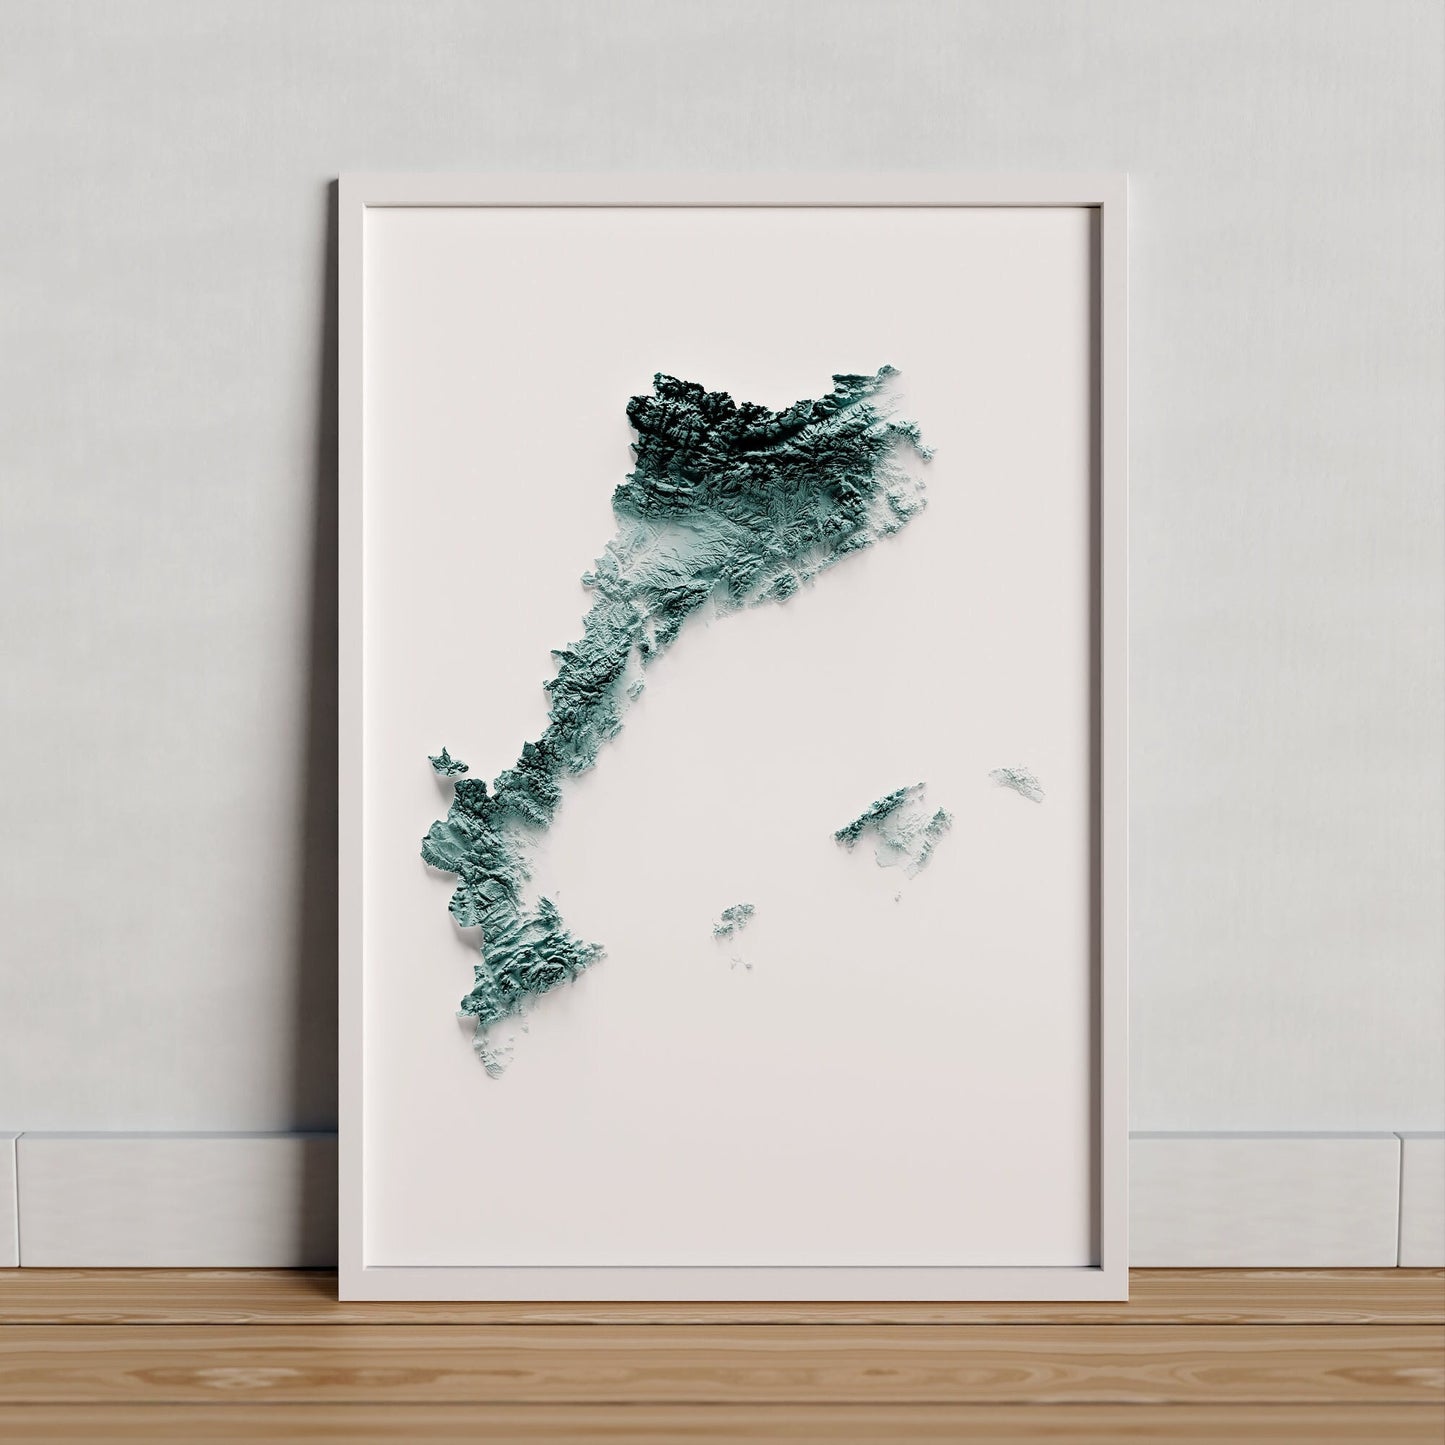 CATALAN COUNTRIES. Artistic relief map.